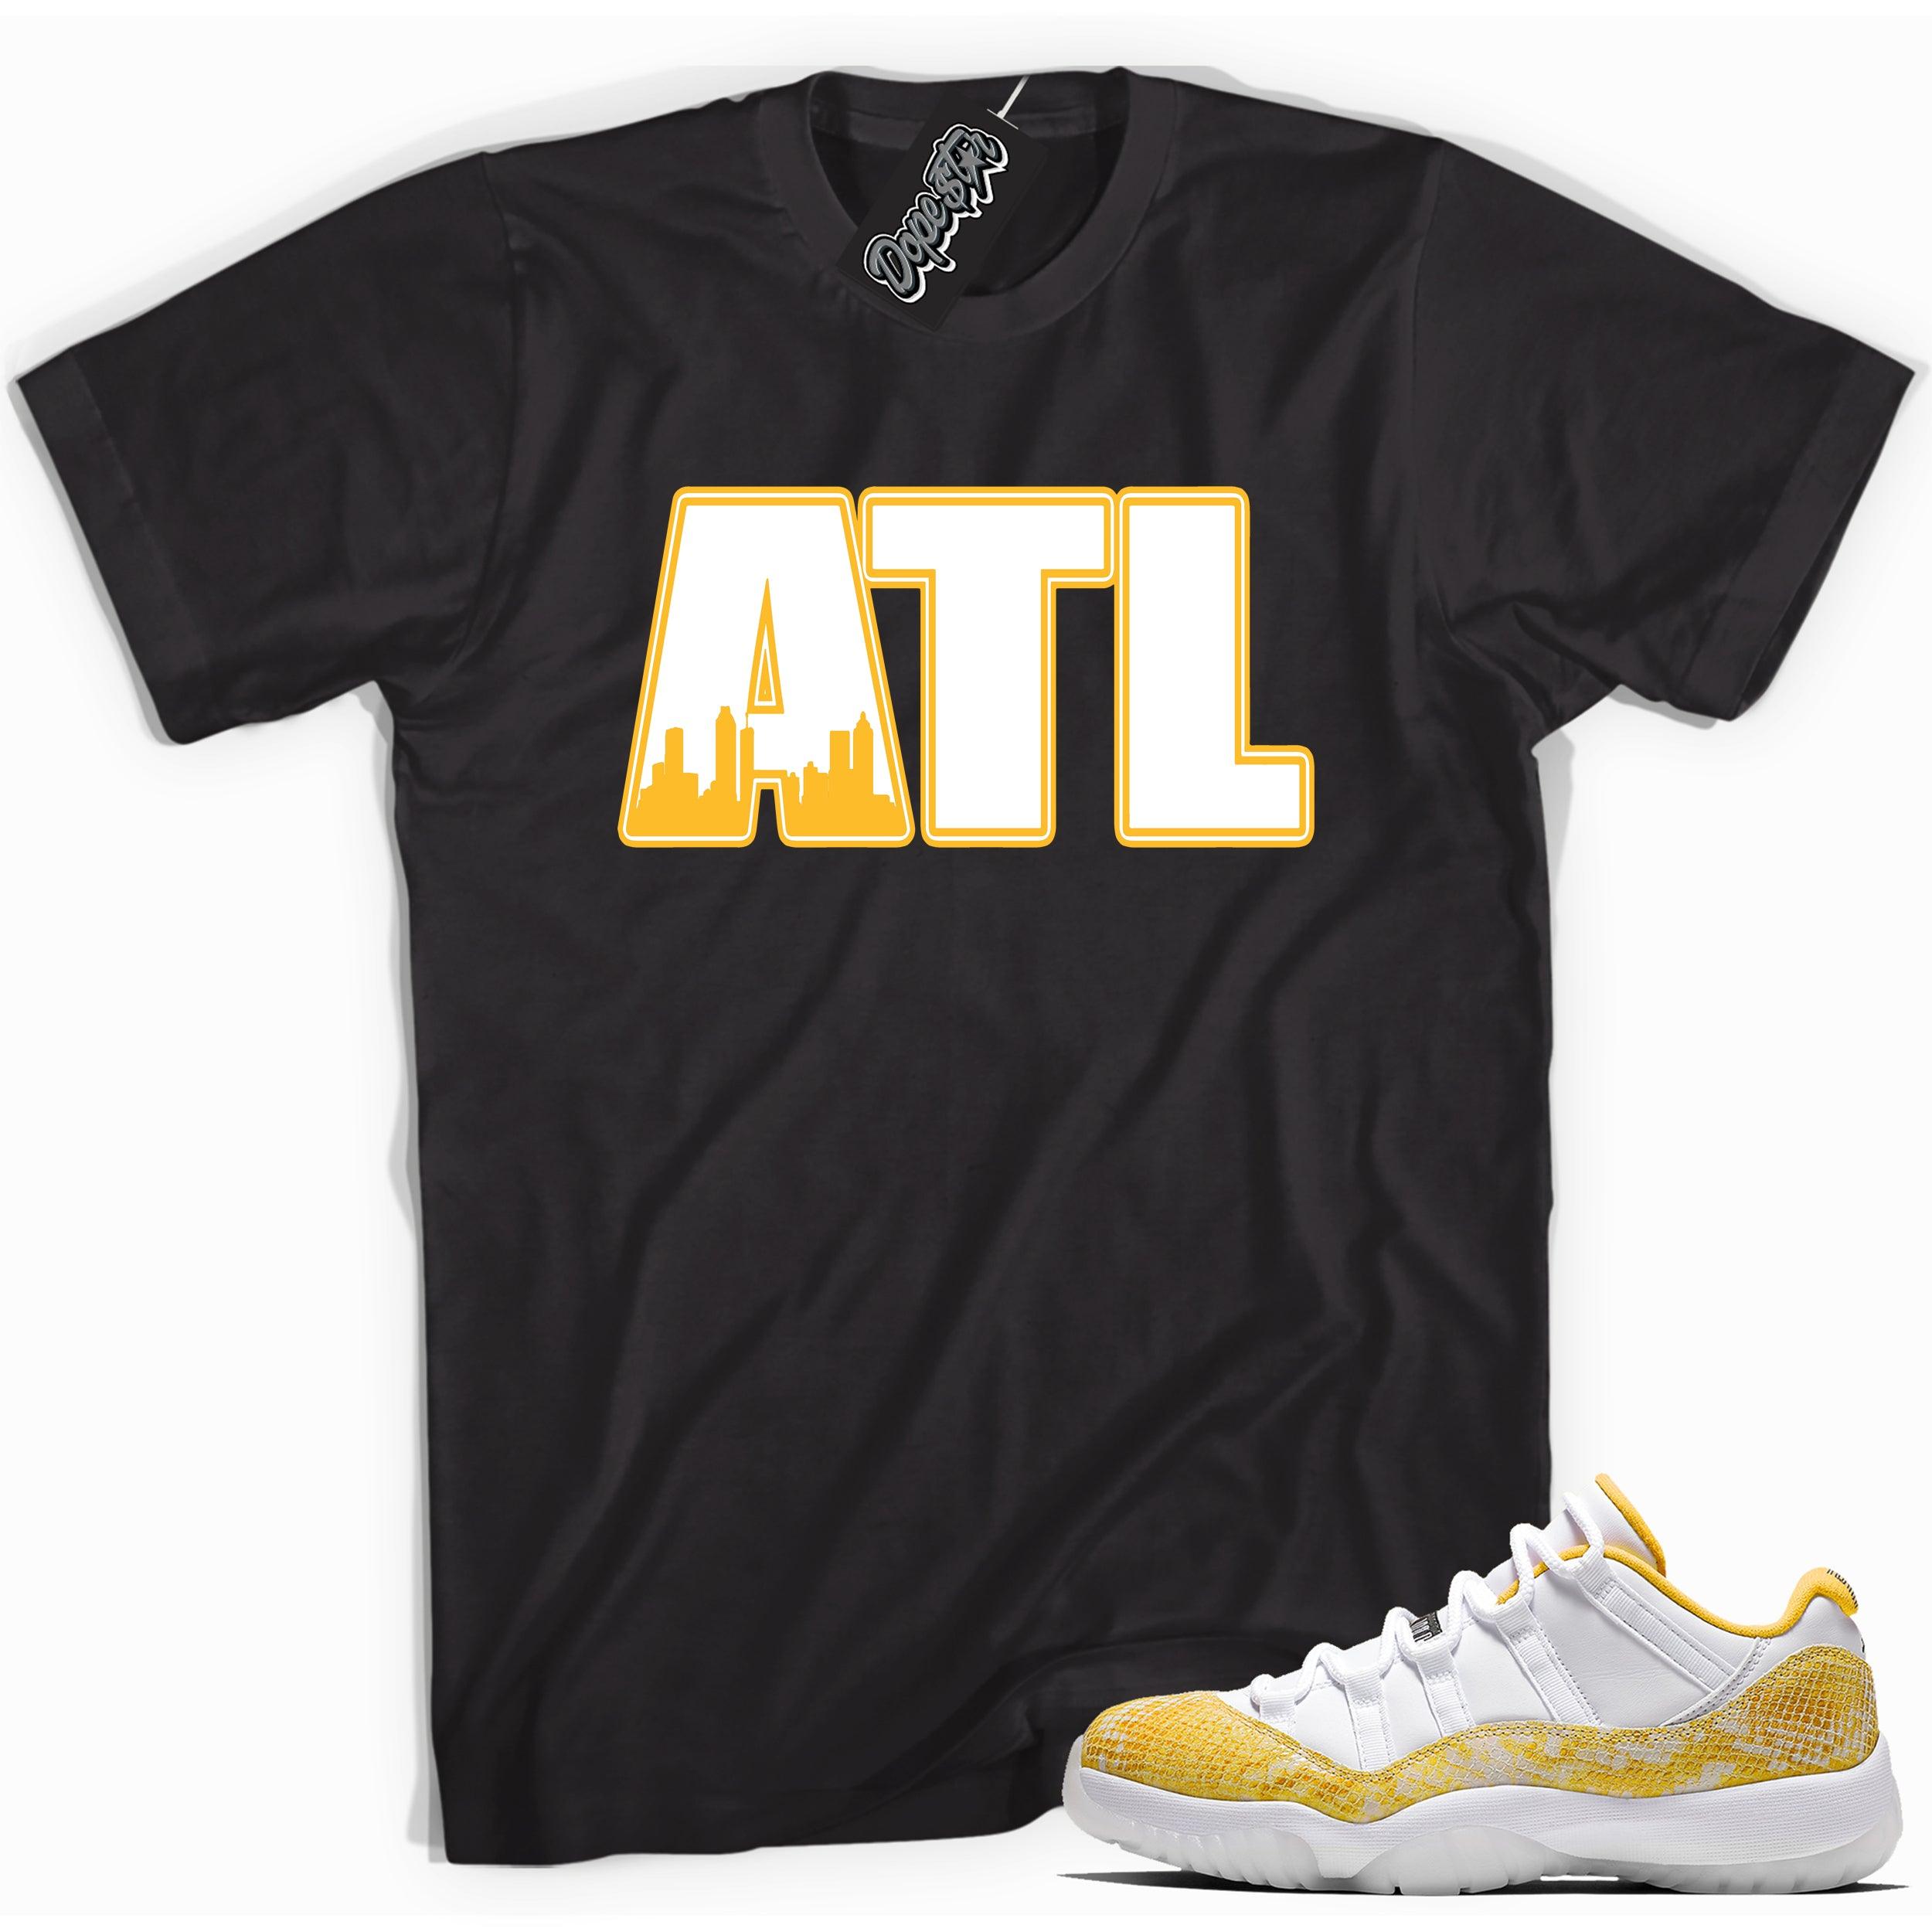 Cool black graphic tee with 'ATL' print, that perfectly matches  Air Jordan 11 Retro Low Yellow Snakeskin sneakers